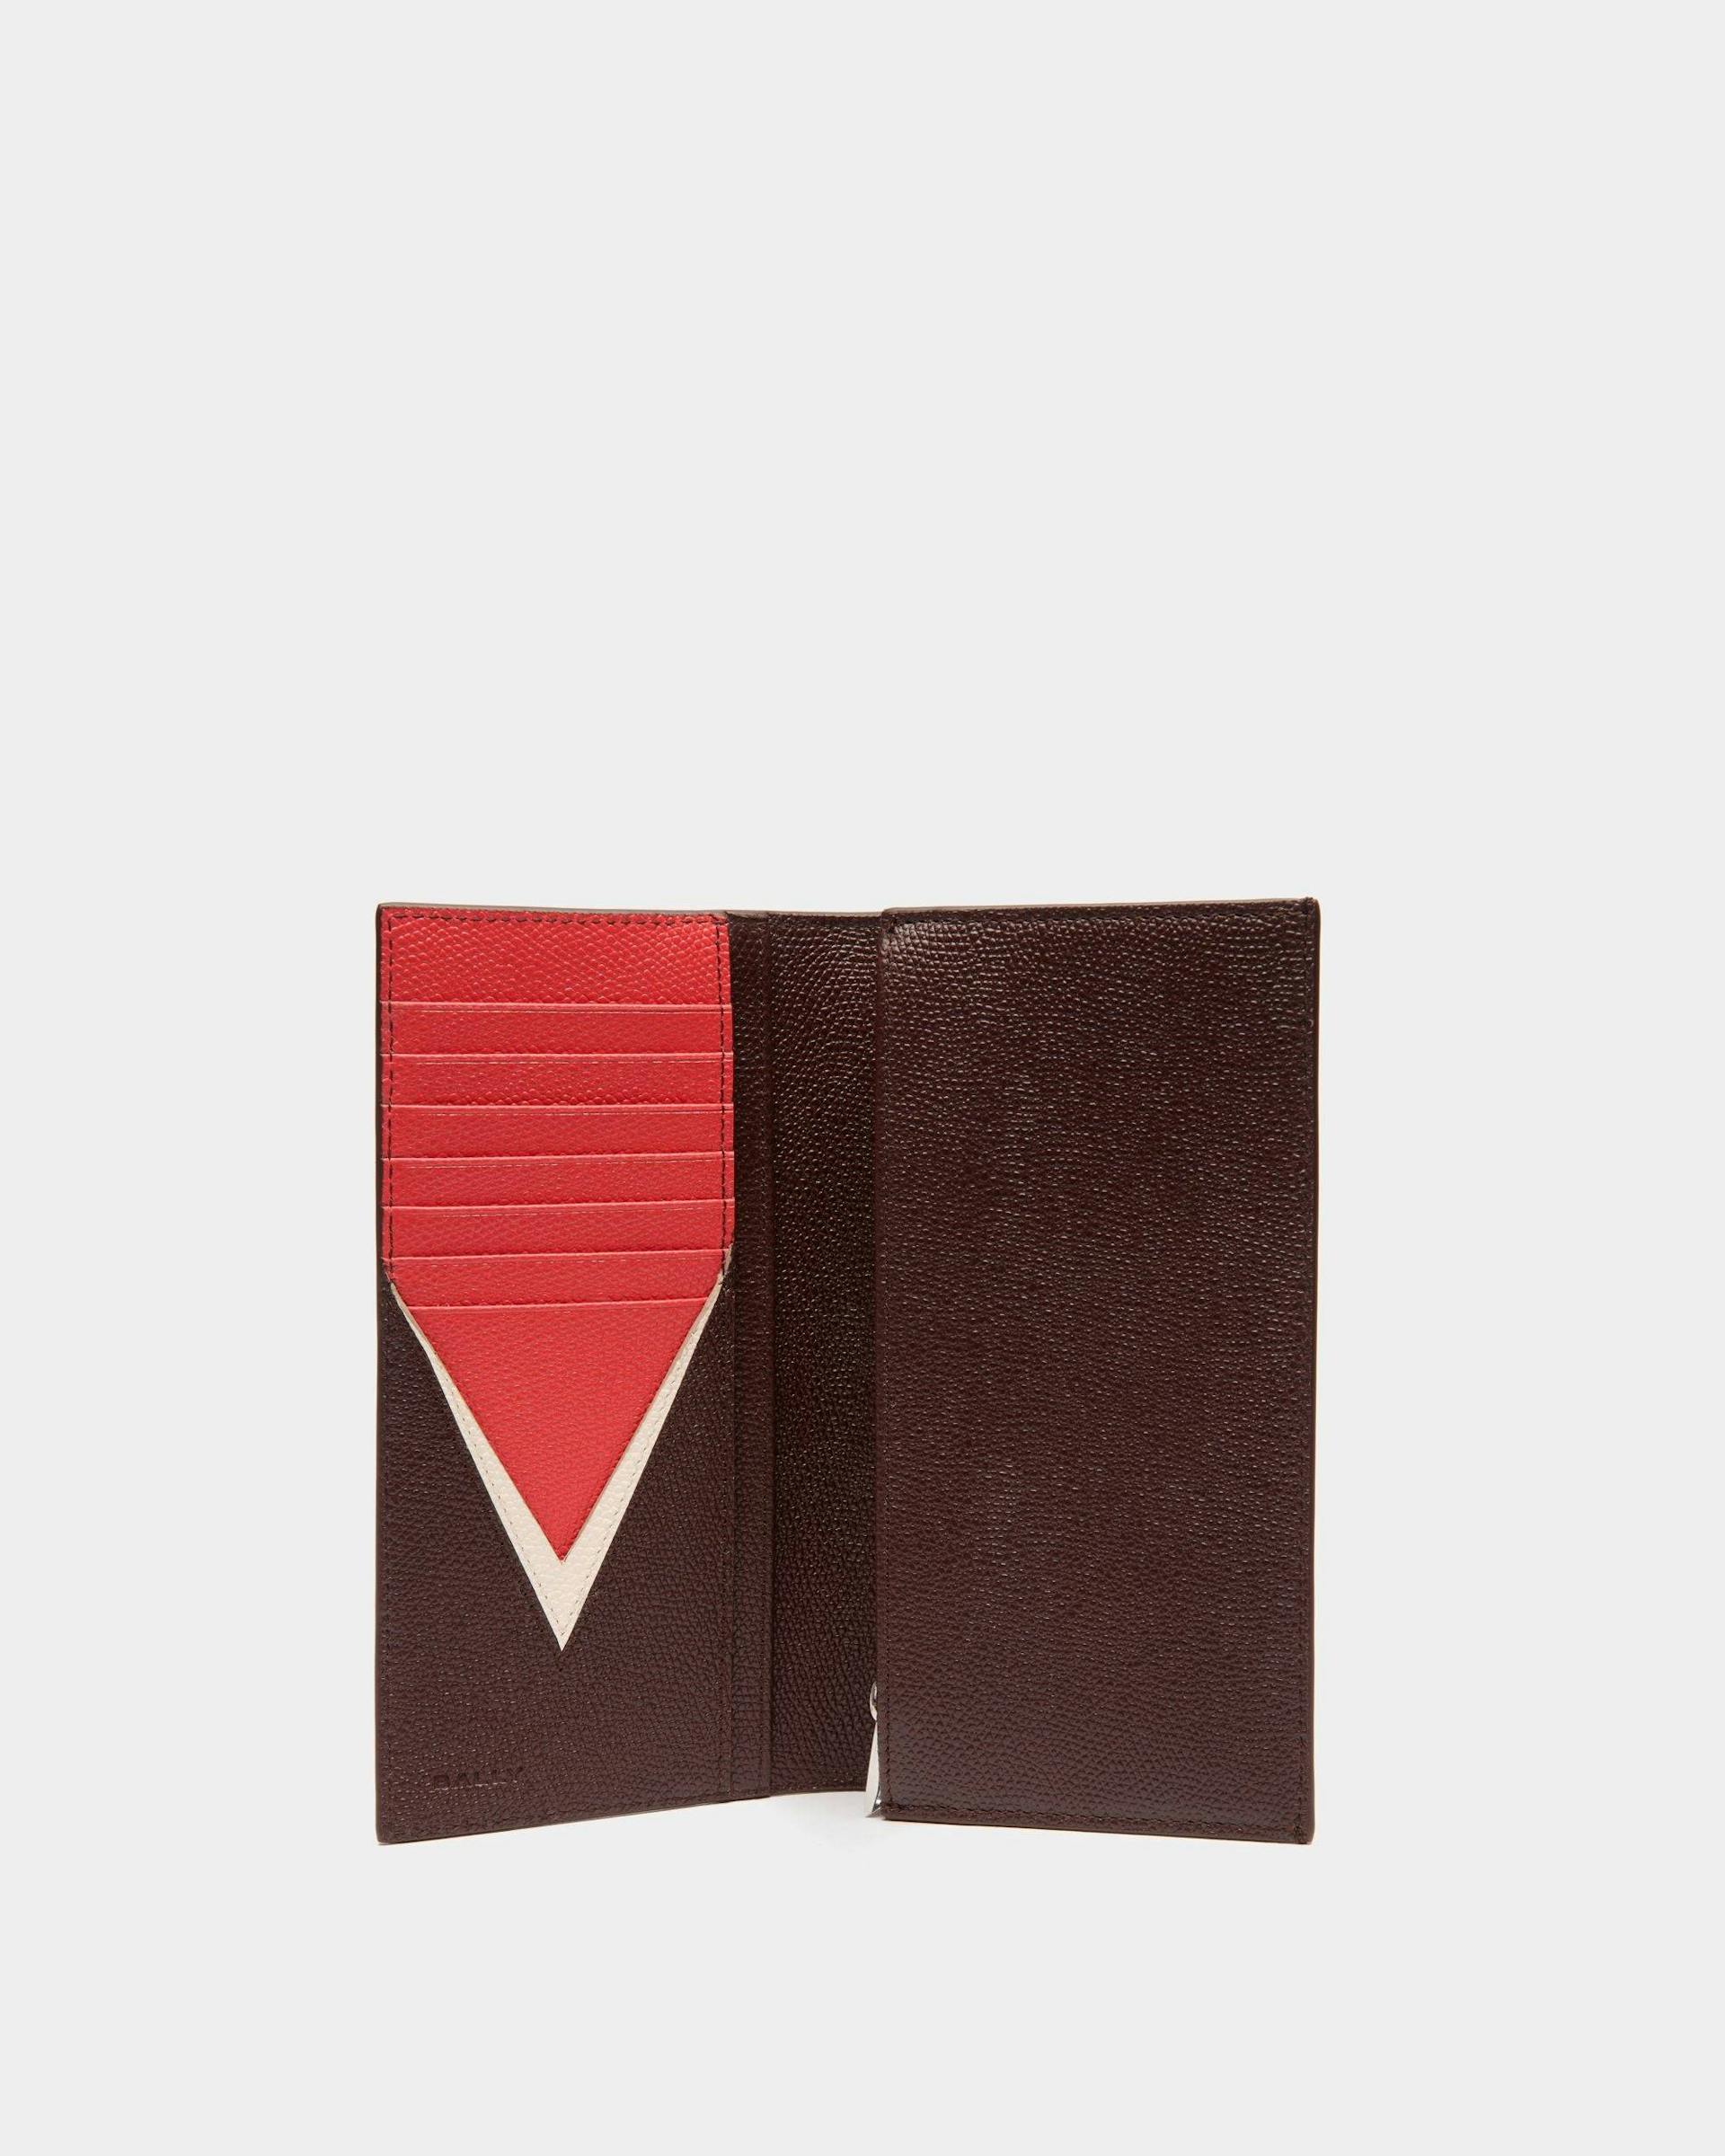 Men's Flag Continental Wallet In Chestnut Brown Grained Leather | Bally | Still Life Open / Inside